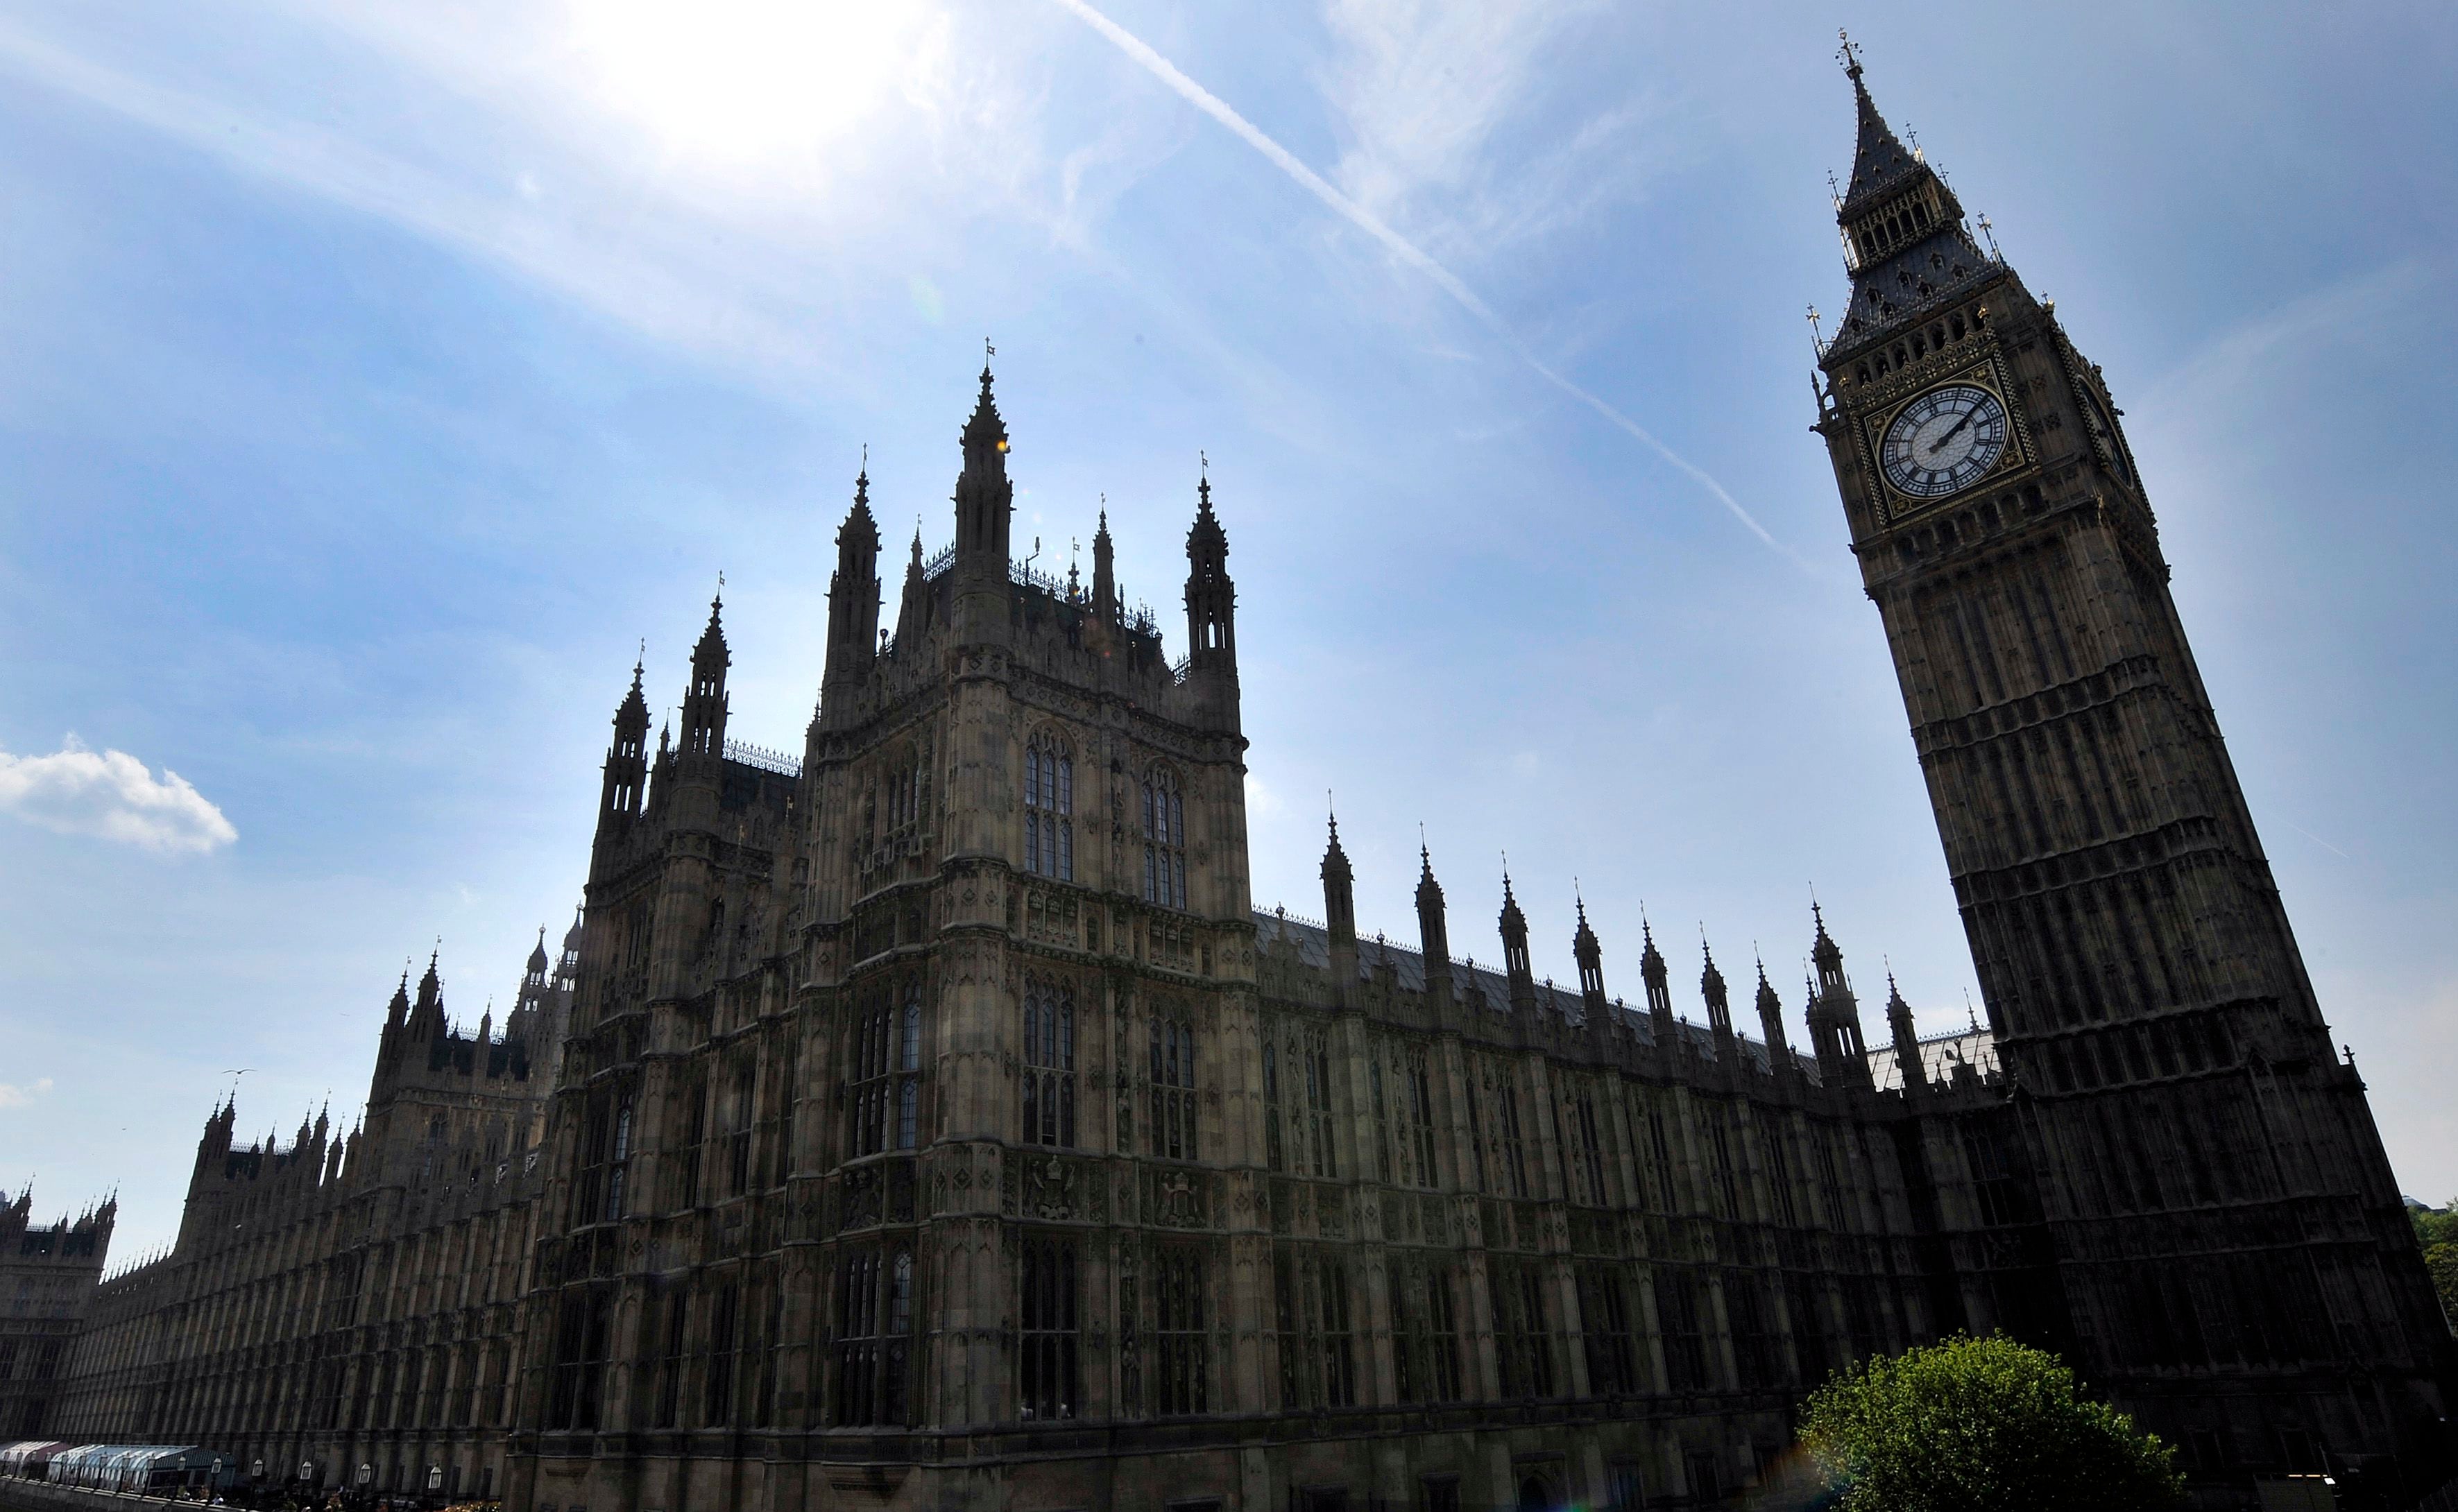 The wellness working group, a cross-party group of MPs’ staff, said the problems highlighted by the report were “very concerning” and called for cultural change at Wesminster